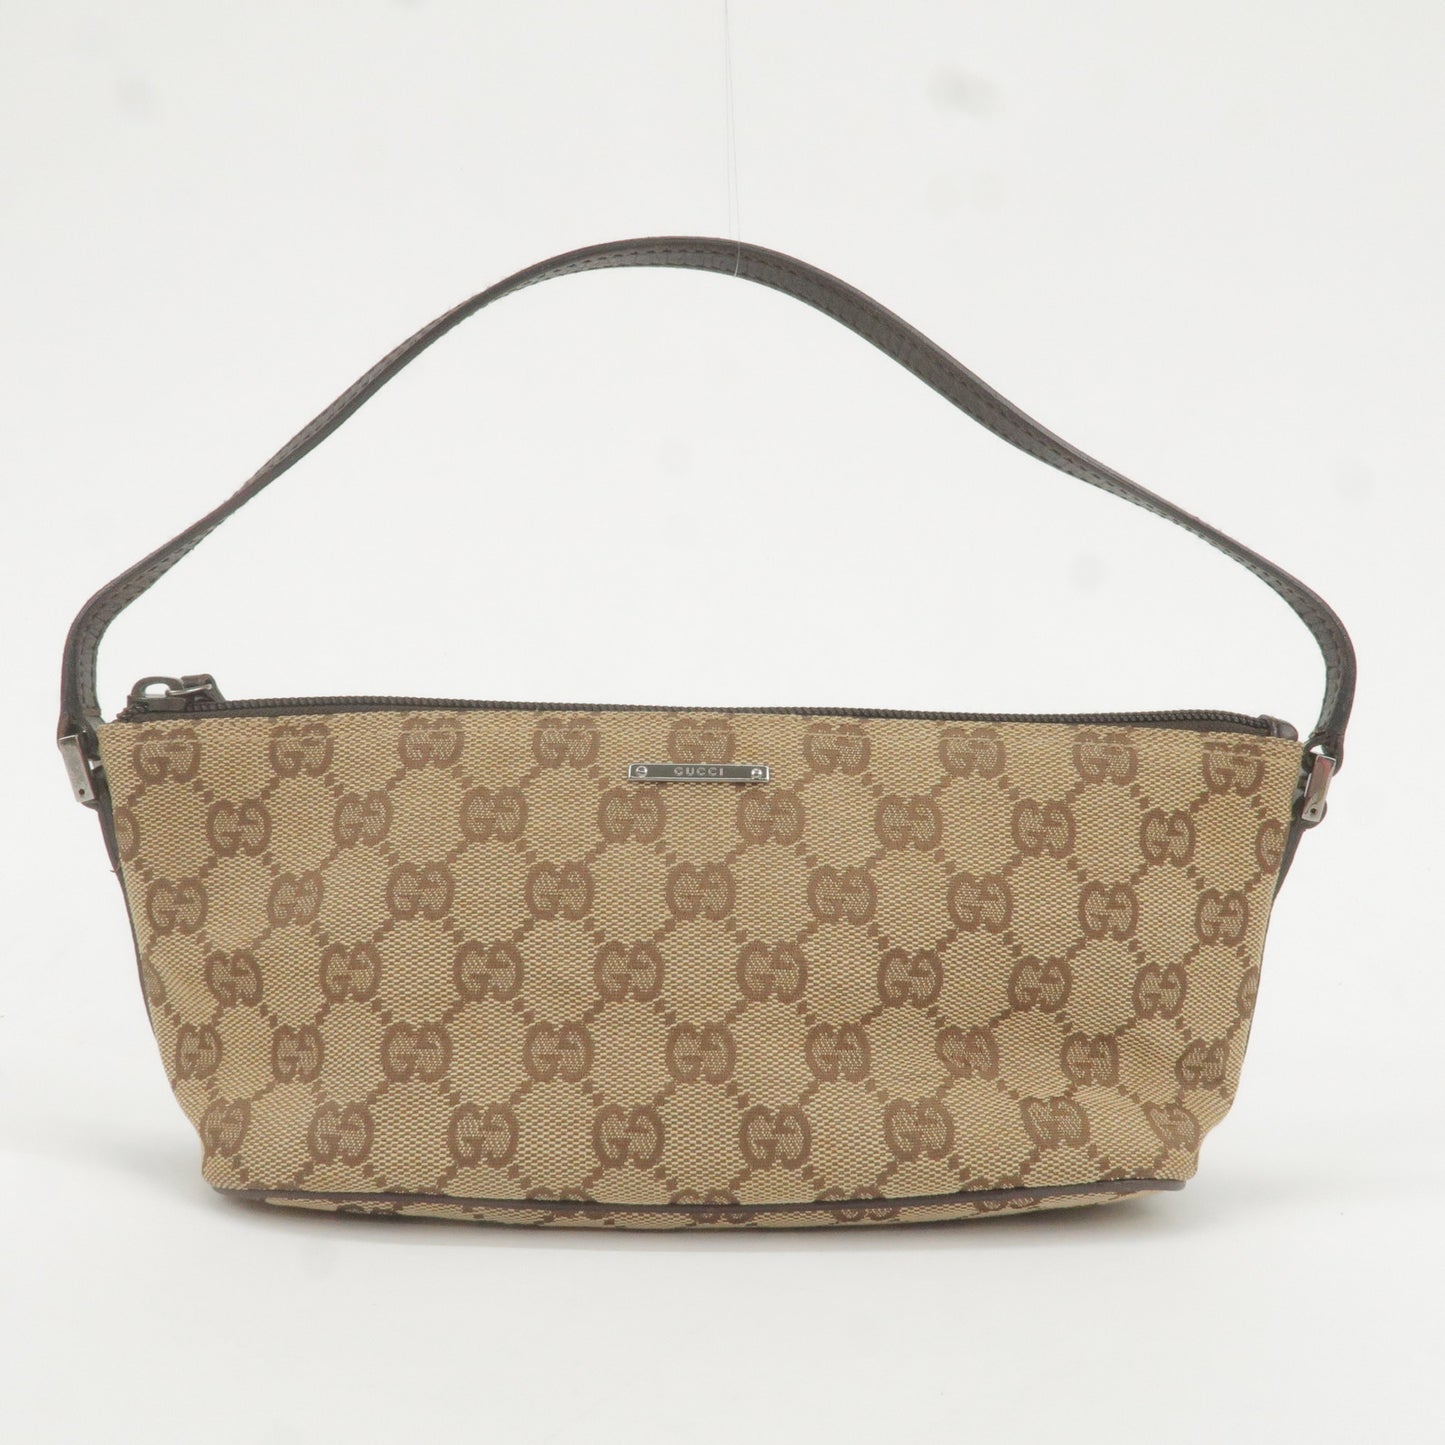 GUCCI Boat Bag GG Canvas Leather Hand Bag Brown Beige 07198